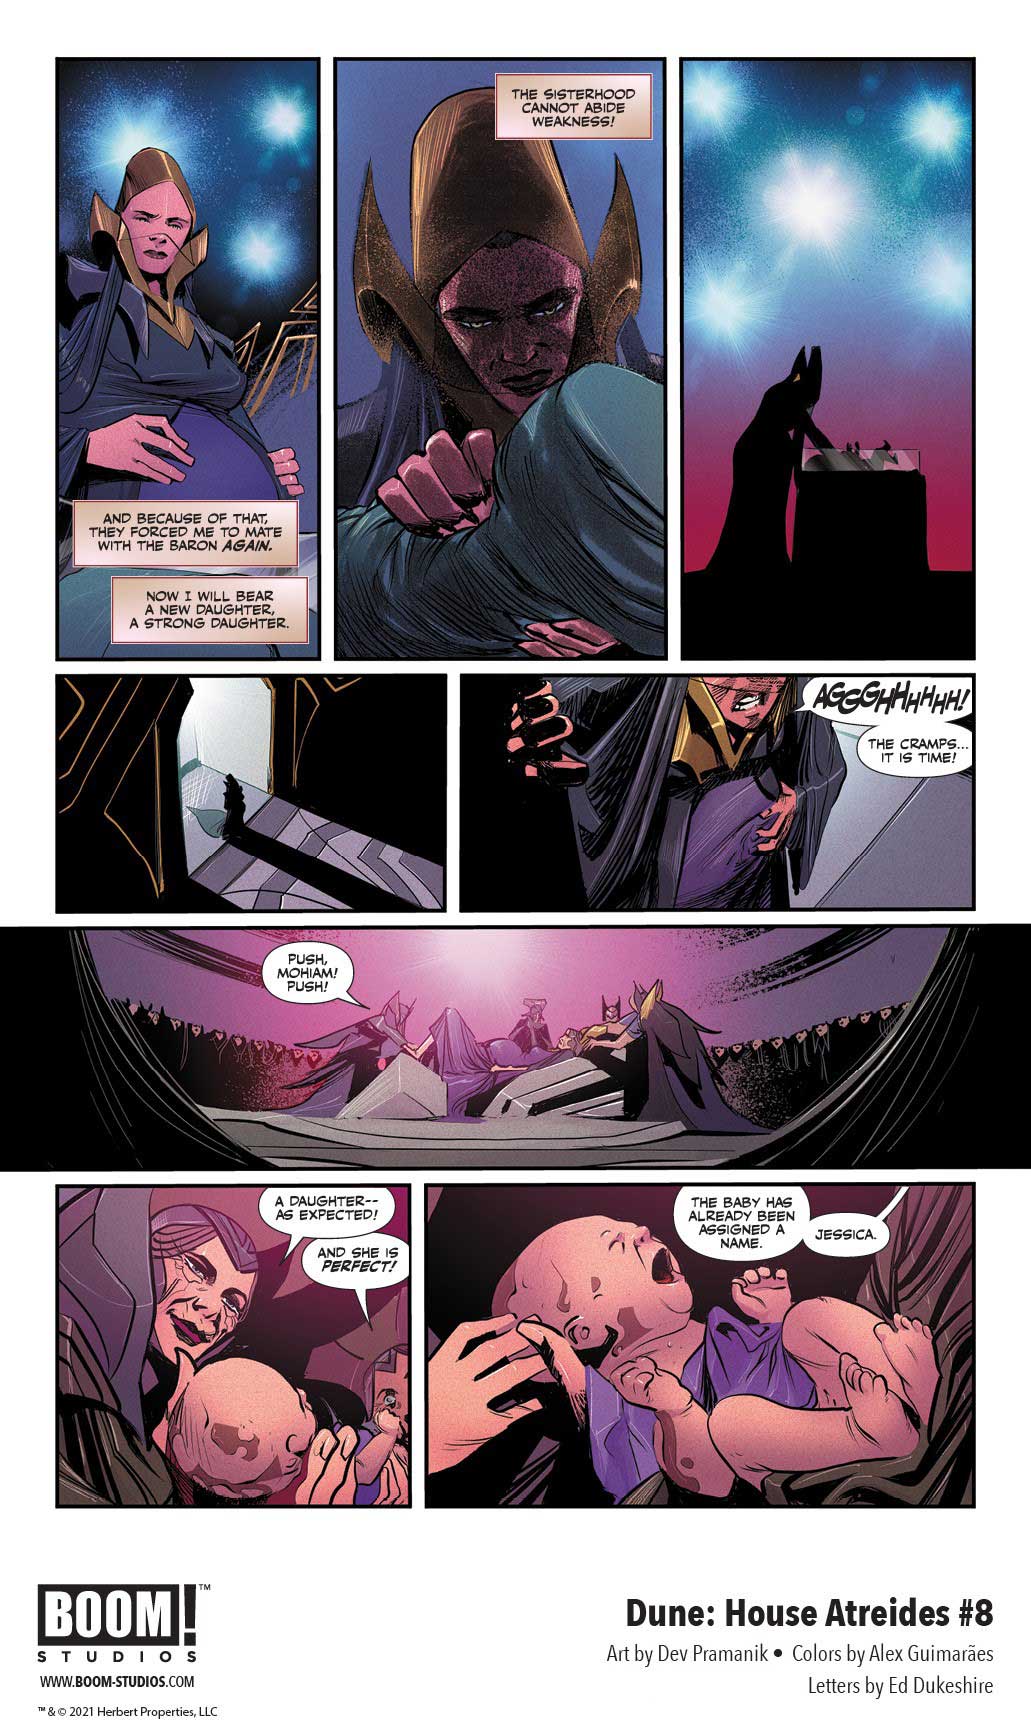 Dune: House Atreides comic series. Issue #8, preview page 5.